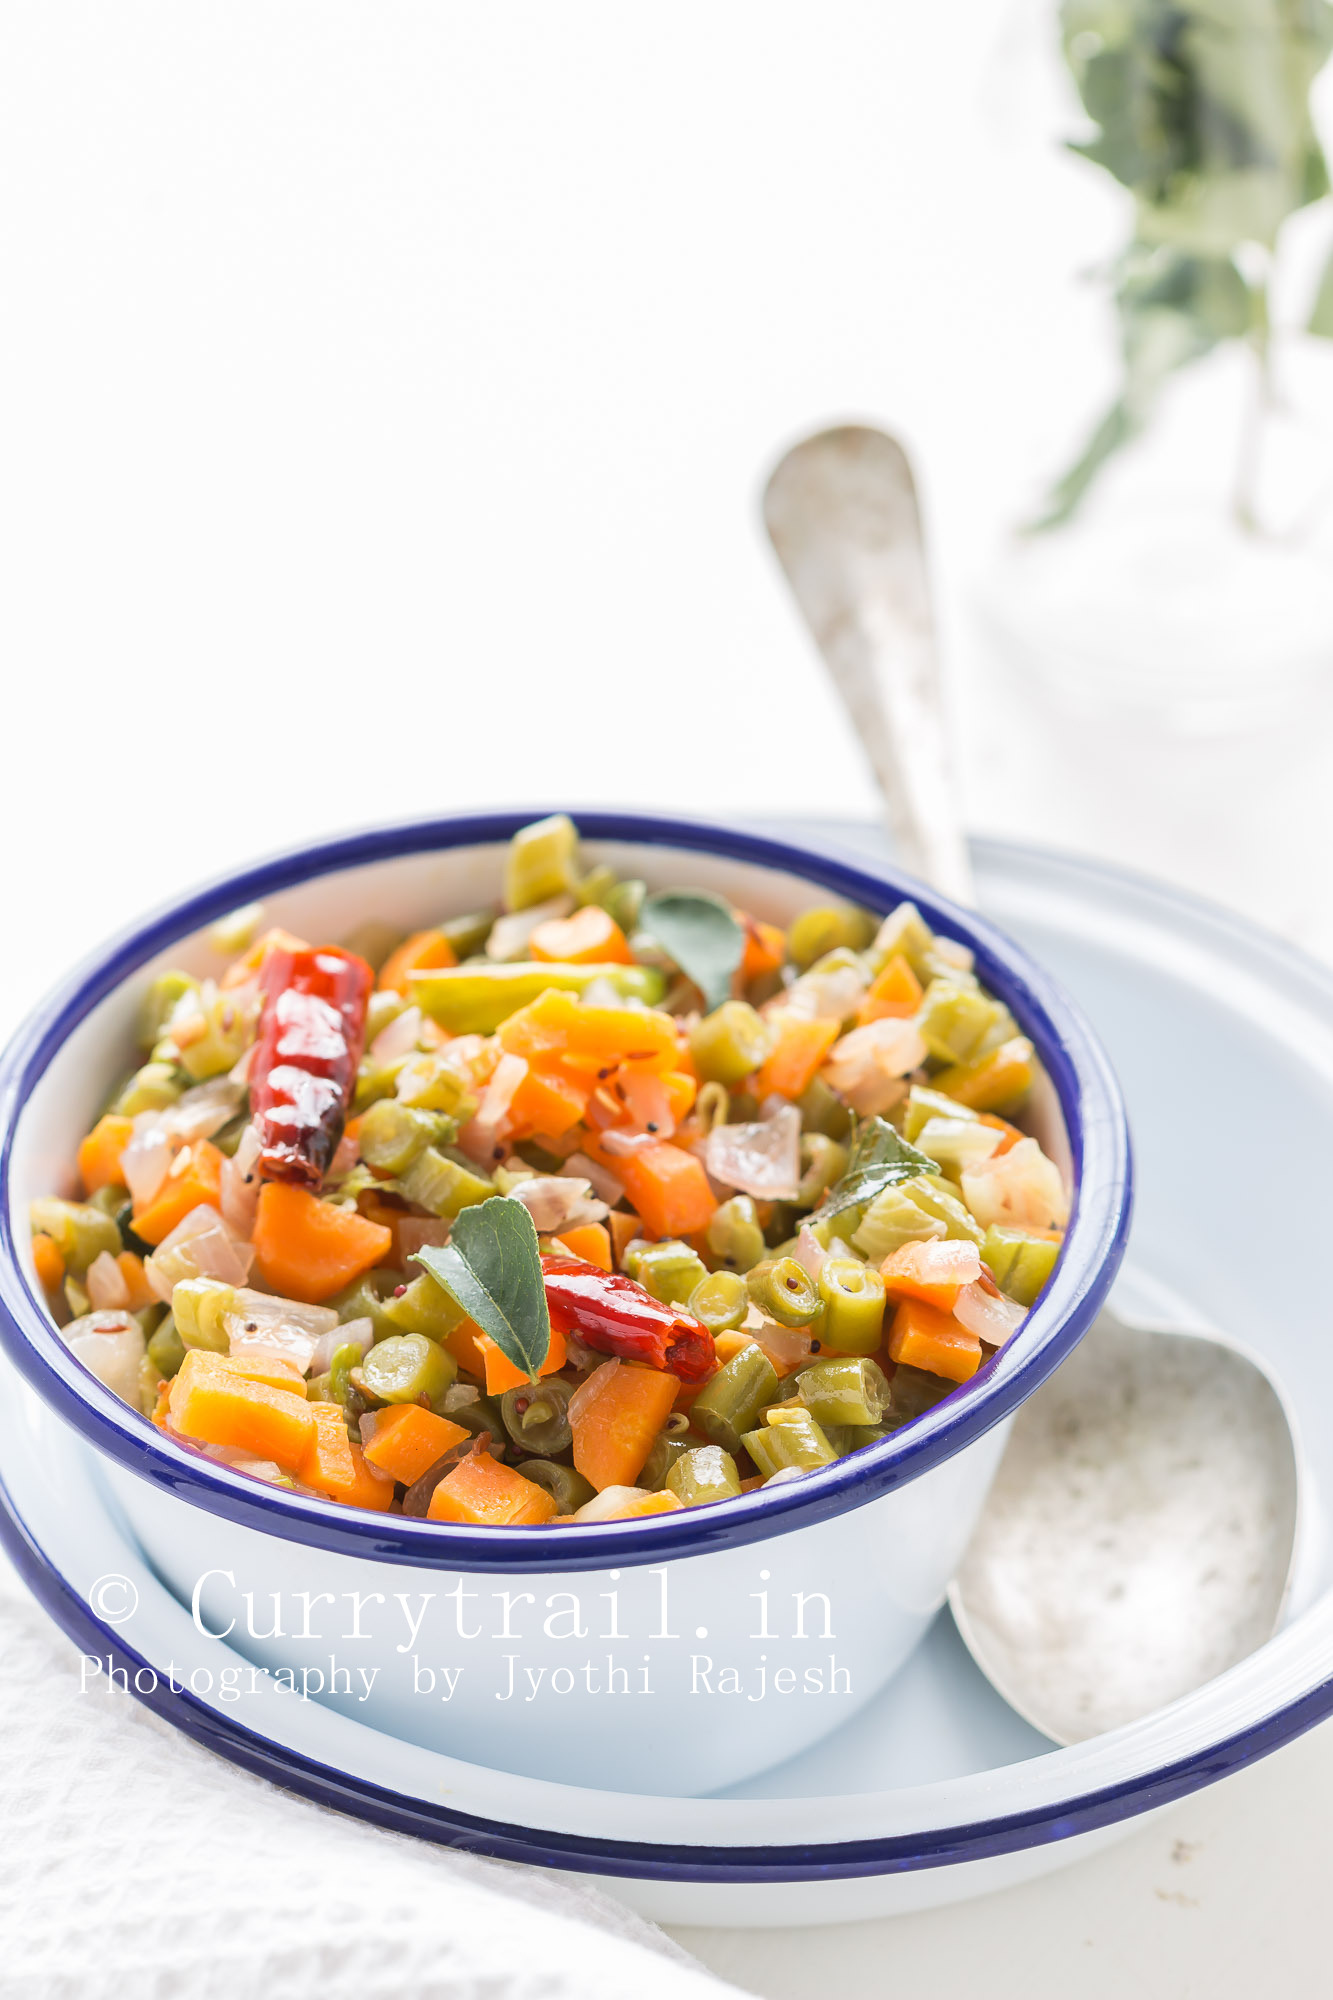 beans carrot poriyal is simple vegetable stir fry side dish popular from South India